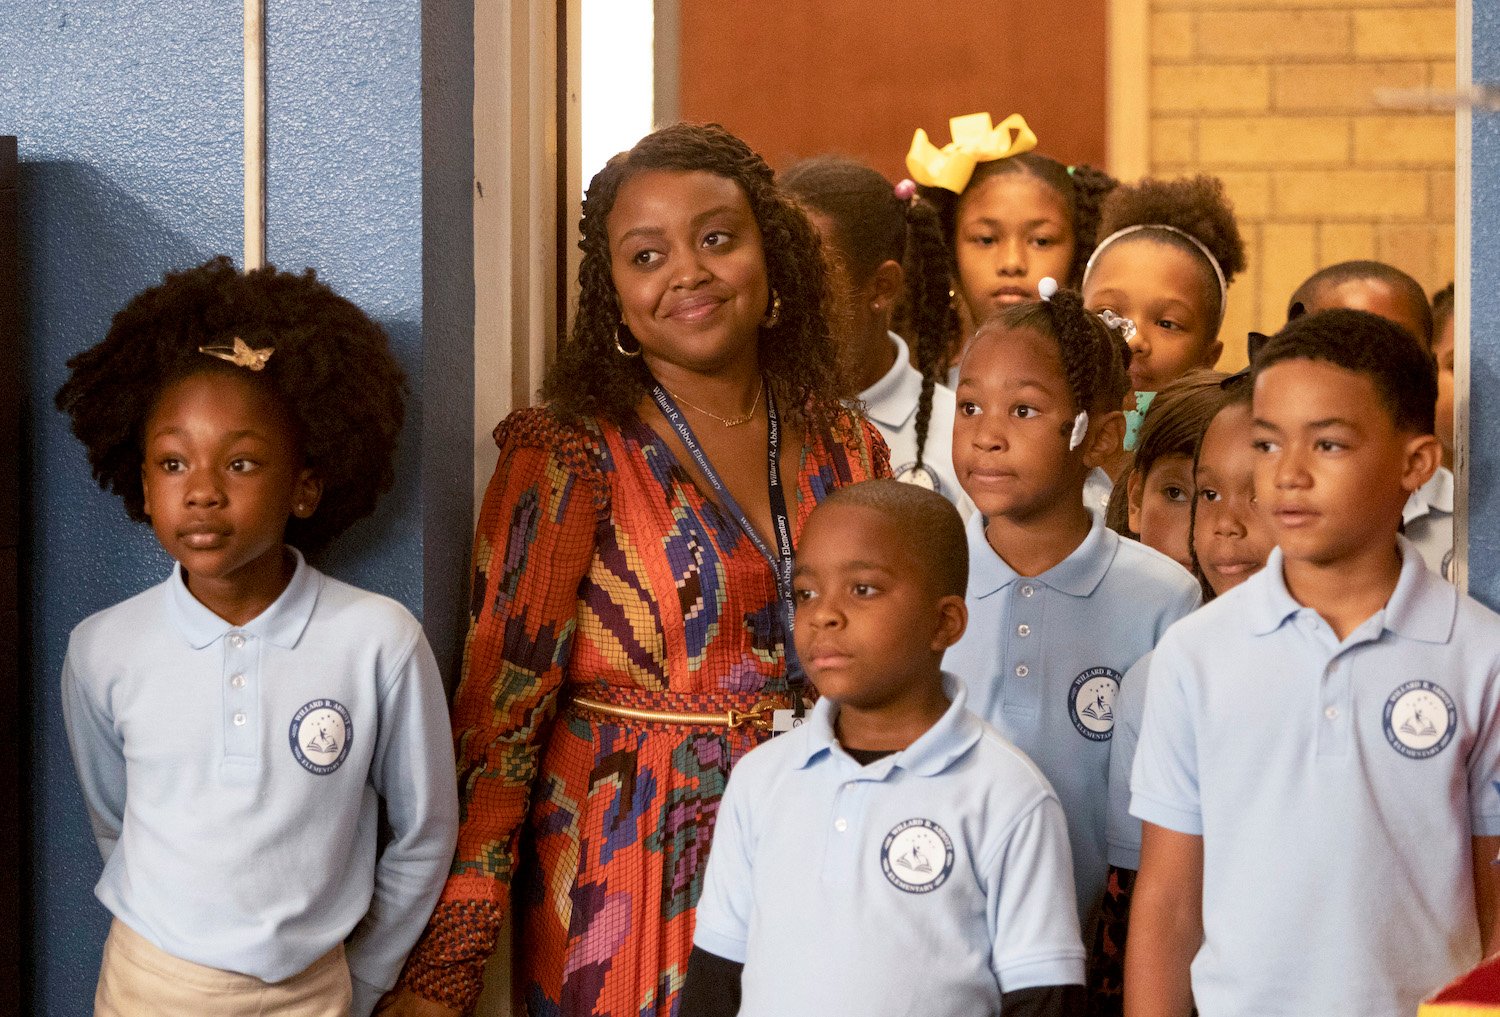 Quinta Brunson stands with students in a photo ahead of 'Abbott Elementary' Season 2